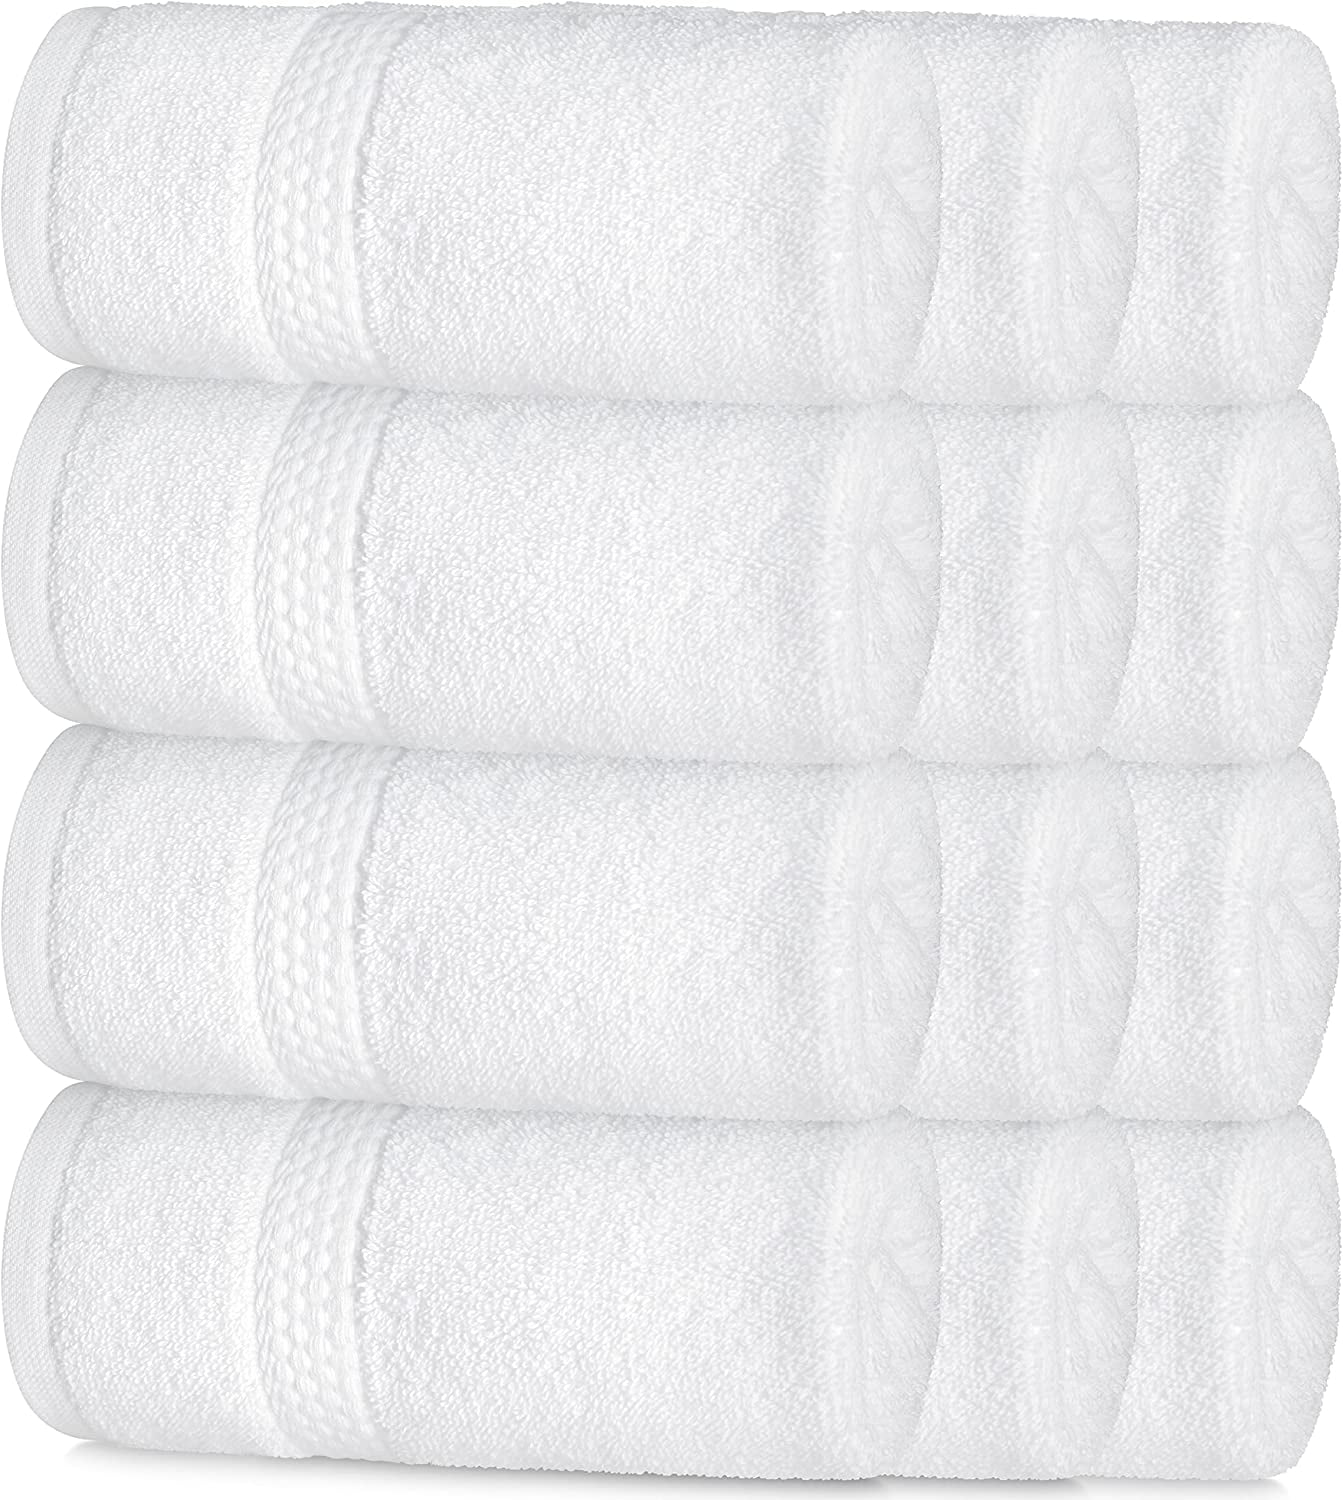 Superio Terry Cloth Rags White Washcloths 100% Cotton 12 Cleaning Cloths,  Kitchen Towels, Facial Washcloth, Spa Cloths, Hand Towel, Small Lint Free